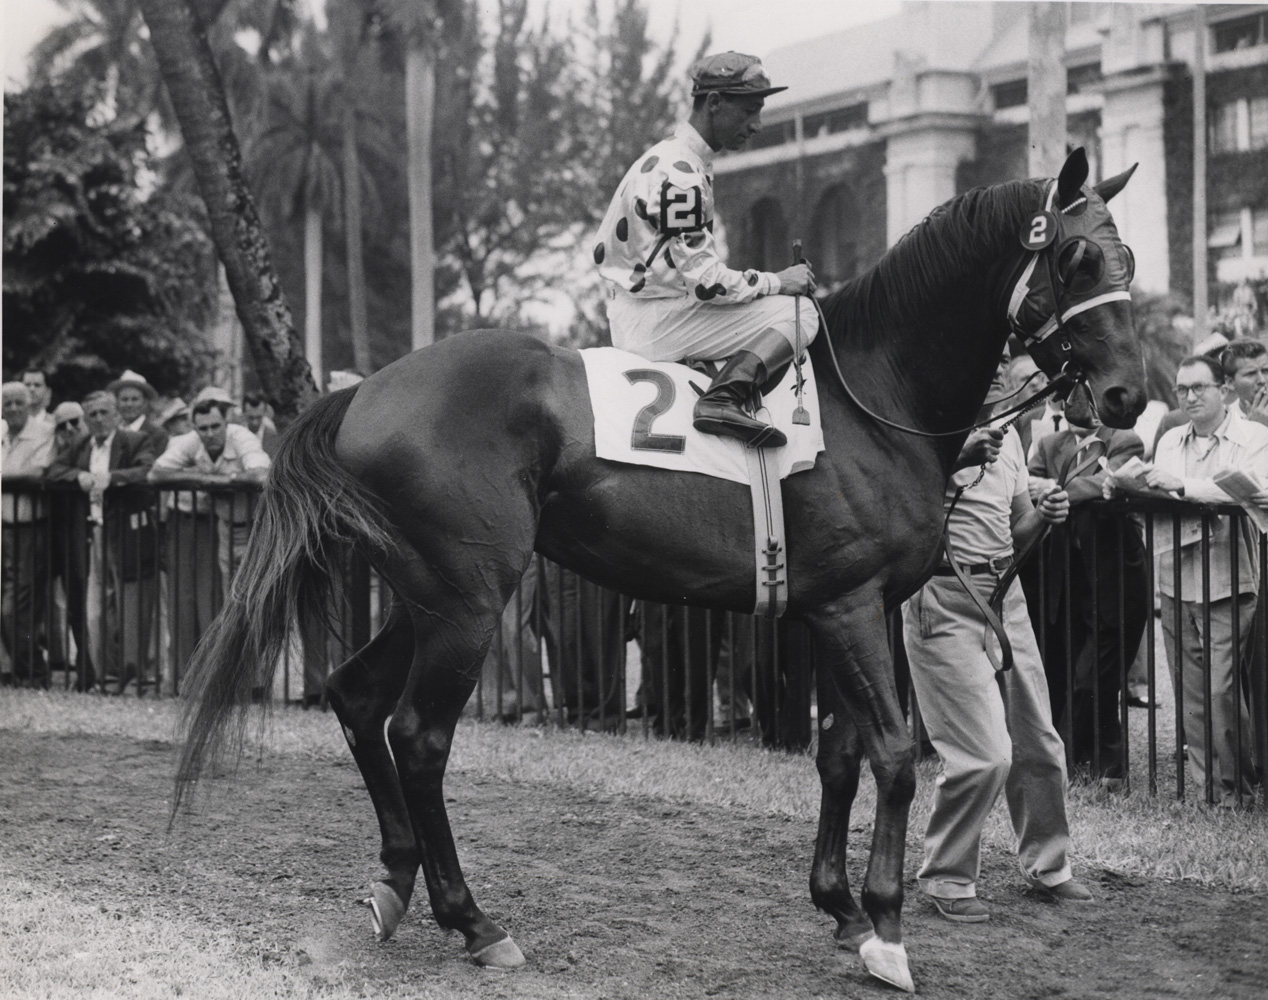 Nashua (Eddie Arcaro up) in the paddock at Hialeah prior to the 1955 Flamingo Stakes (Museum Collection)